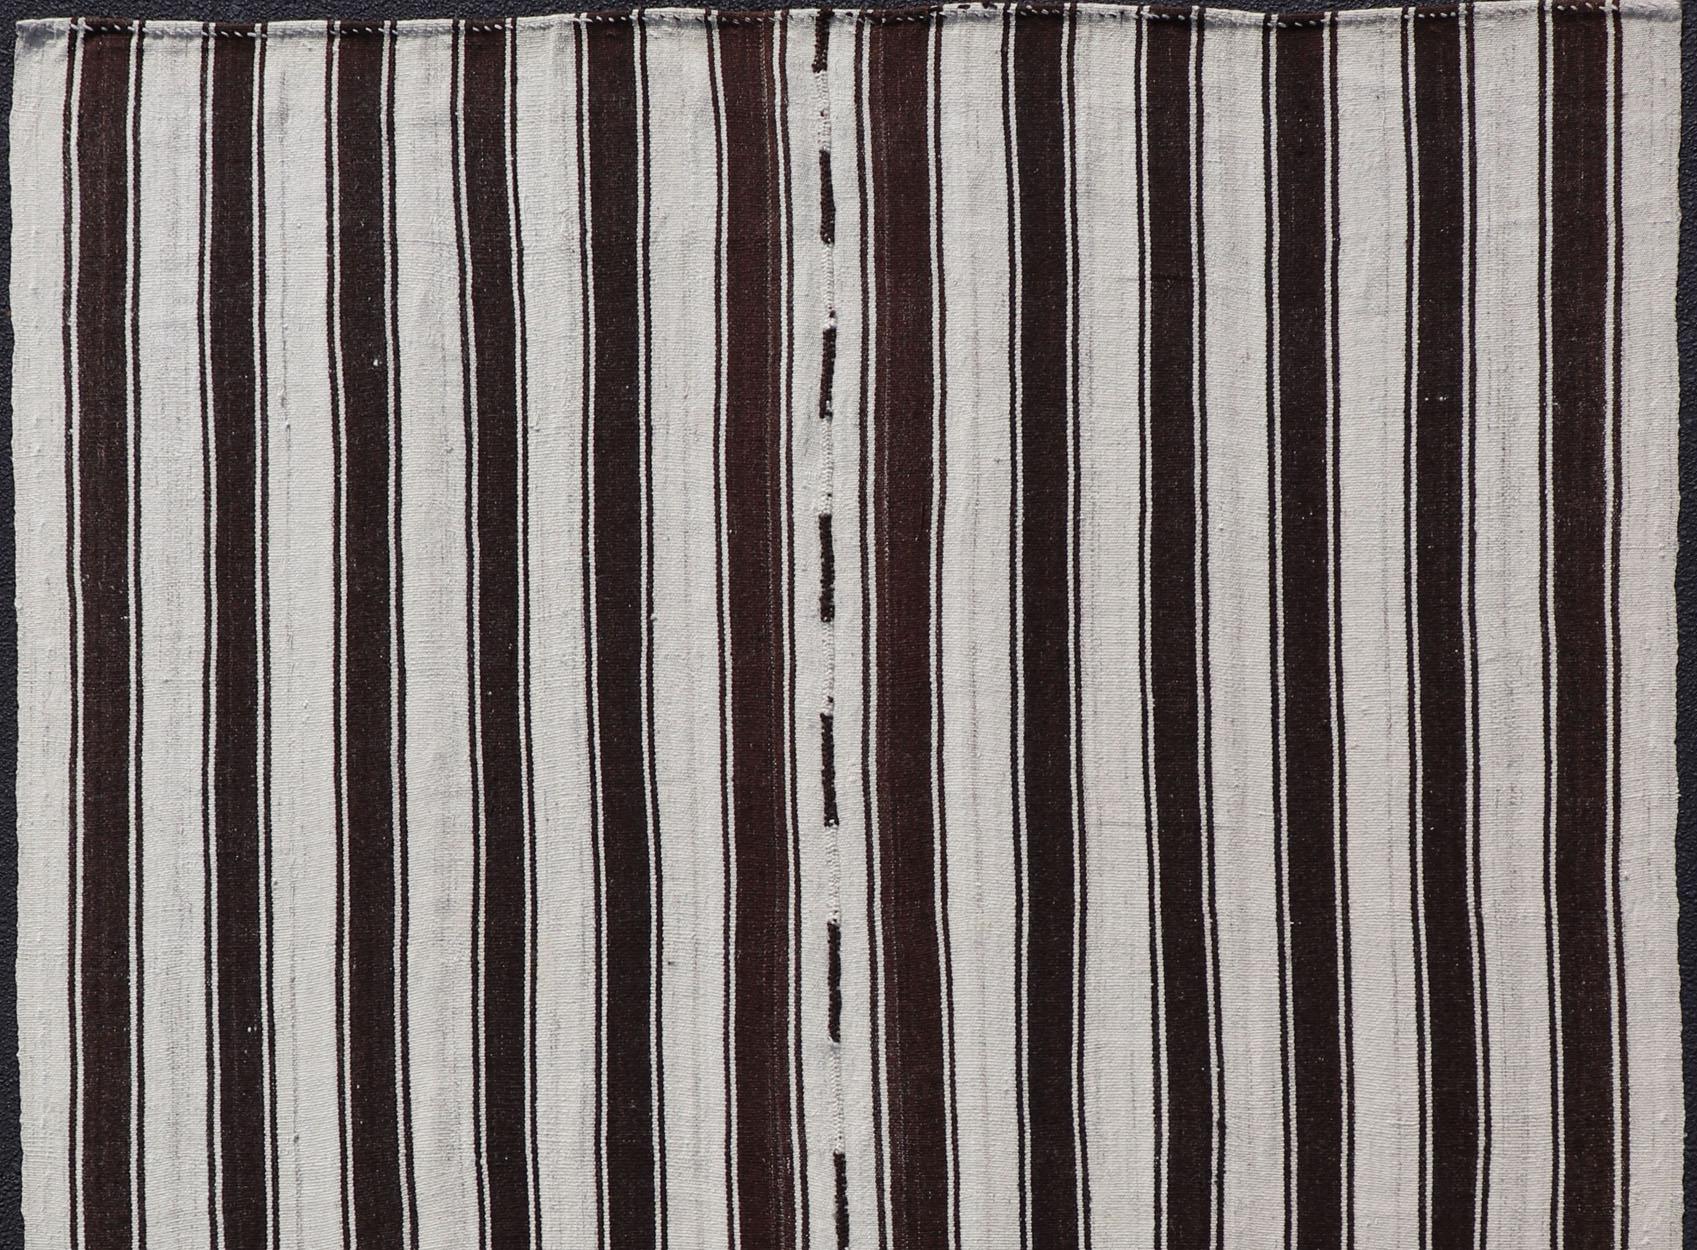 Flat-weave vintage Kilim vintage rug from Turkey with vertical stripes in dark brown and cream. Rug TU-NED-1123, country of origin / type: Turkey / Kilim, circa 1950

Woven during the mid-20th century in Turkey, this Kilim is decorated with a